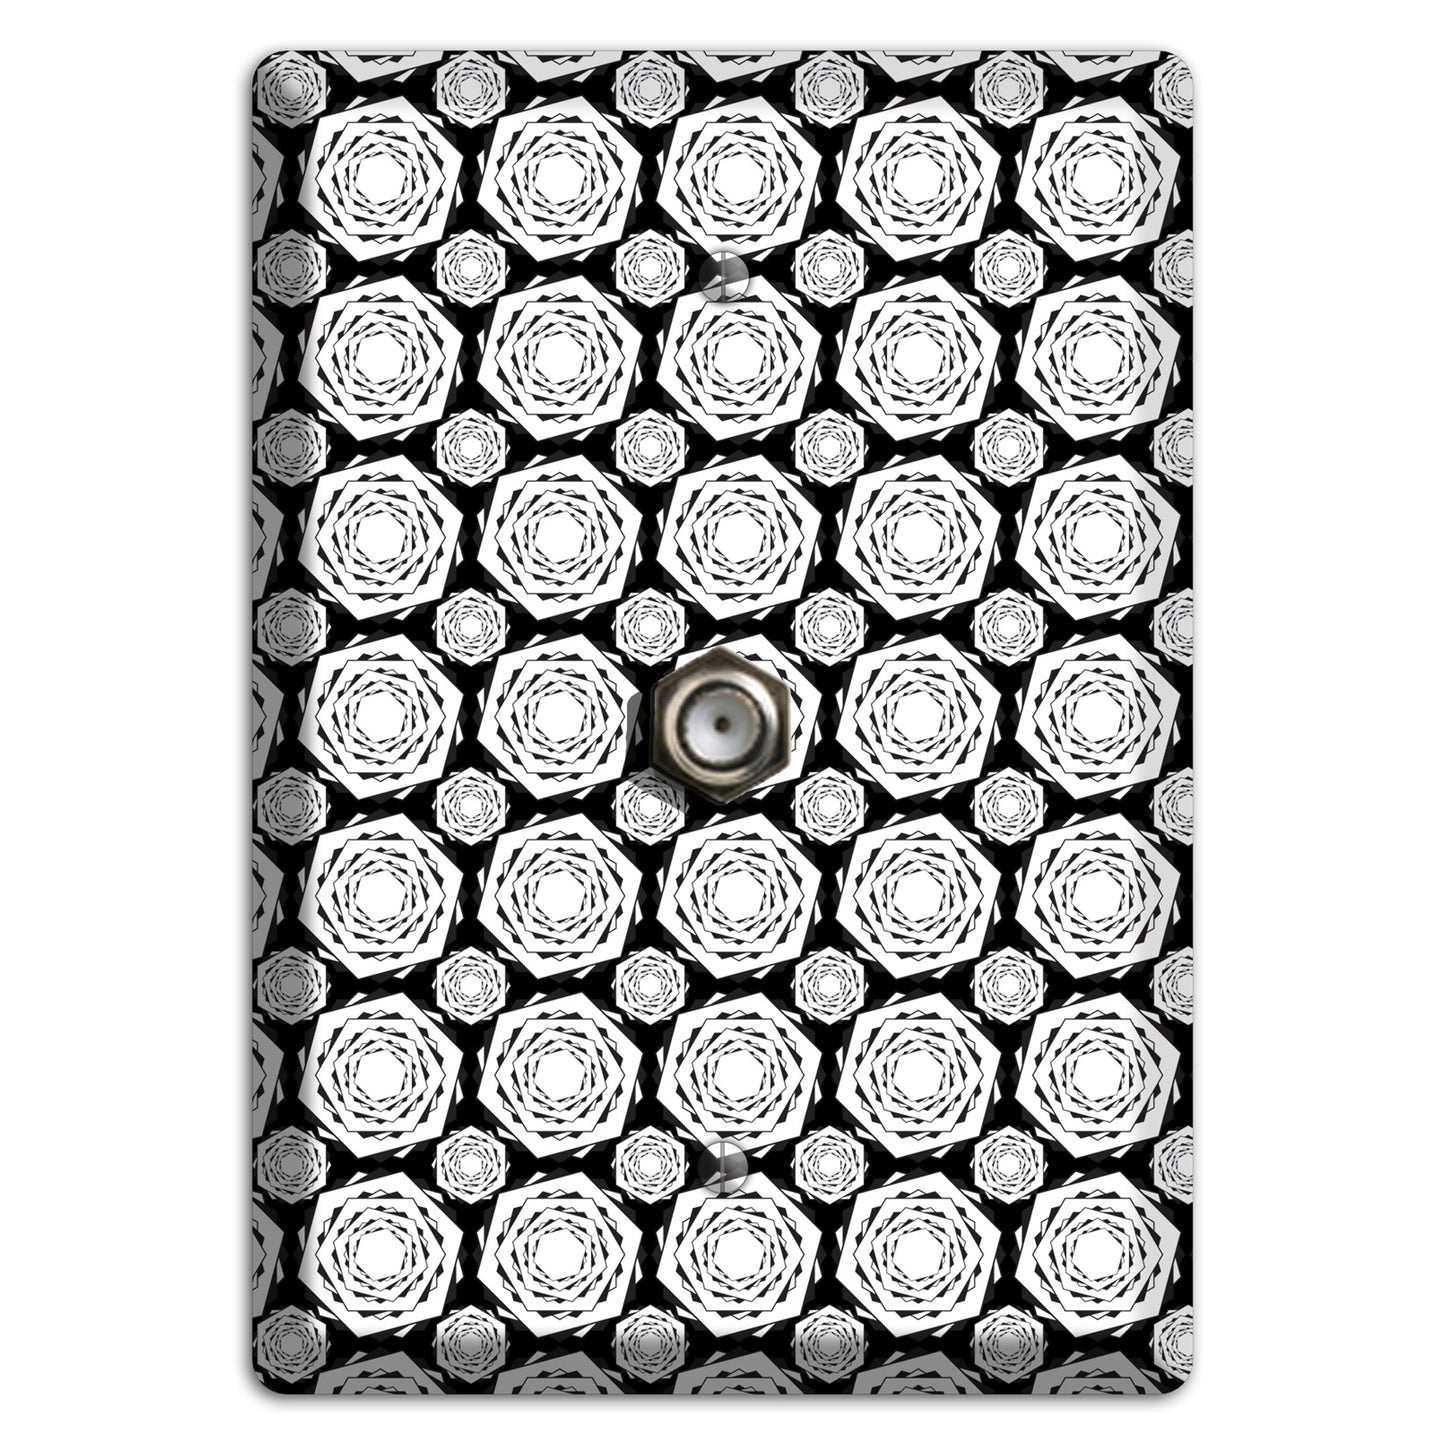 Overlay Hexagon Rotation Repeat 3 Cable Wallplate